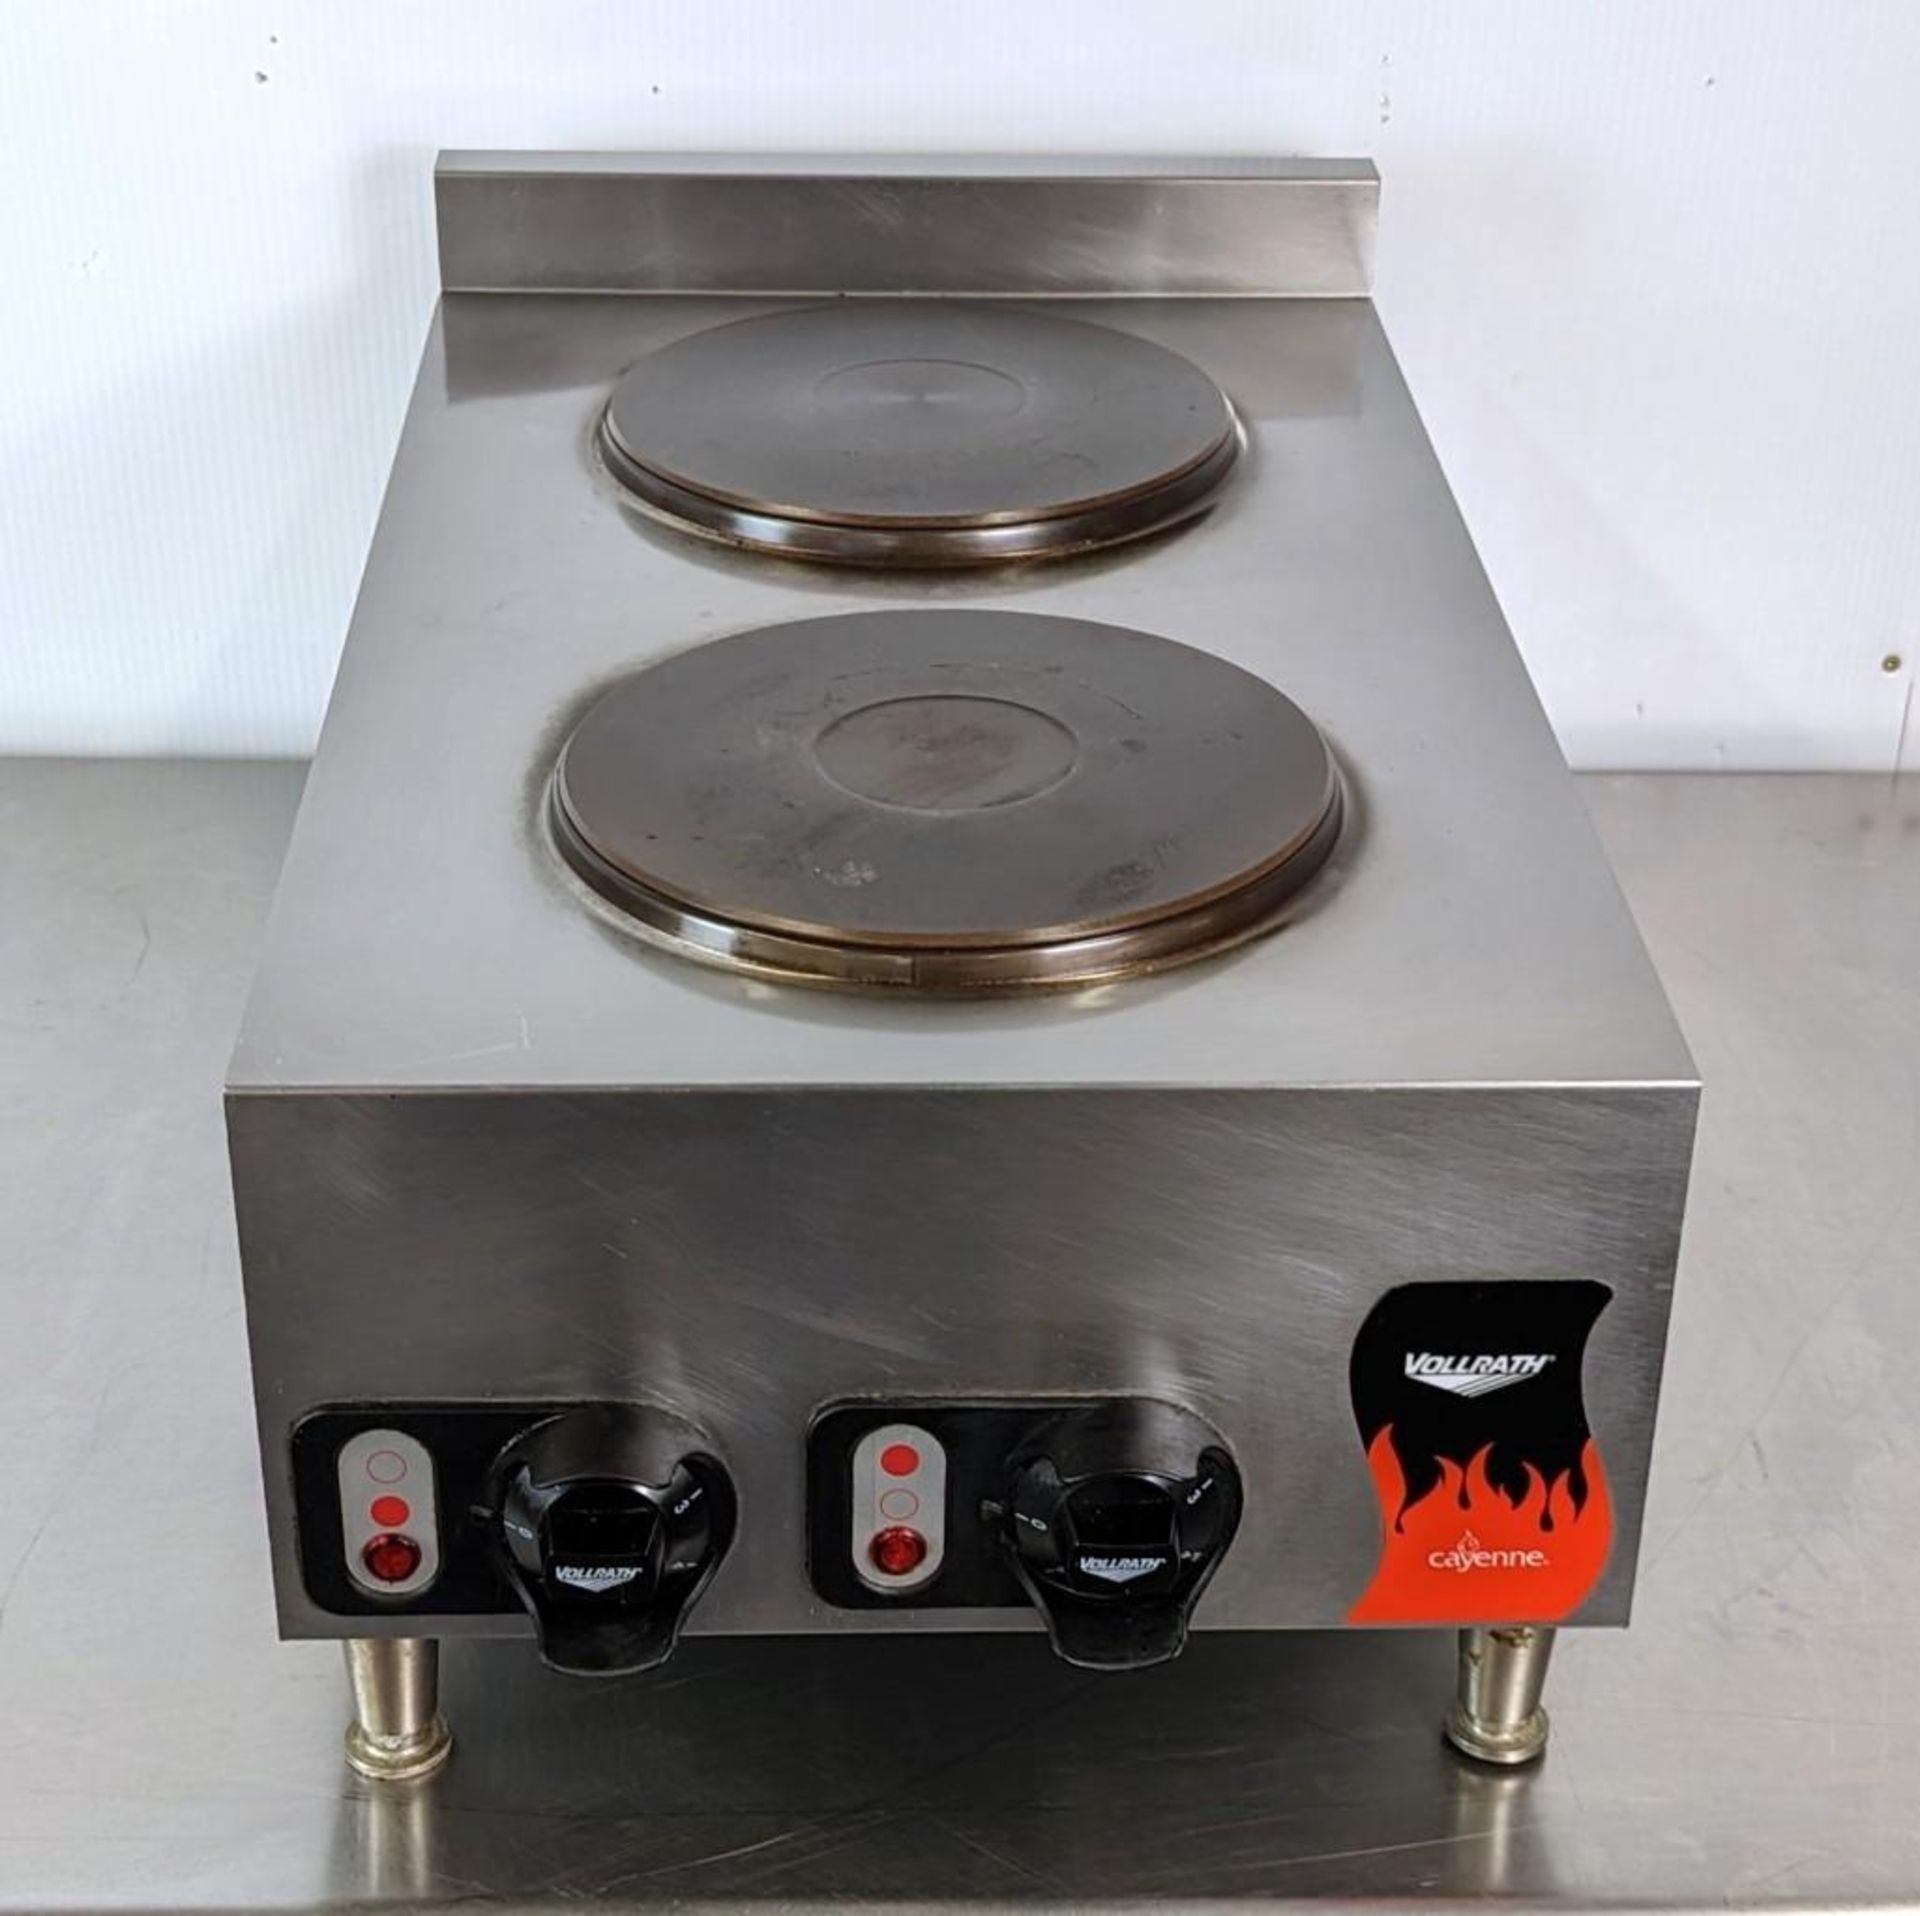 VOLLRATH STA8002 TWO BURNER ELECTRIC HOT PLATE - Image 2 of 7